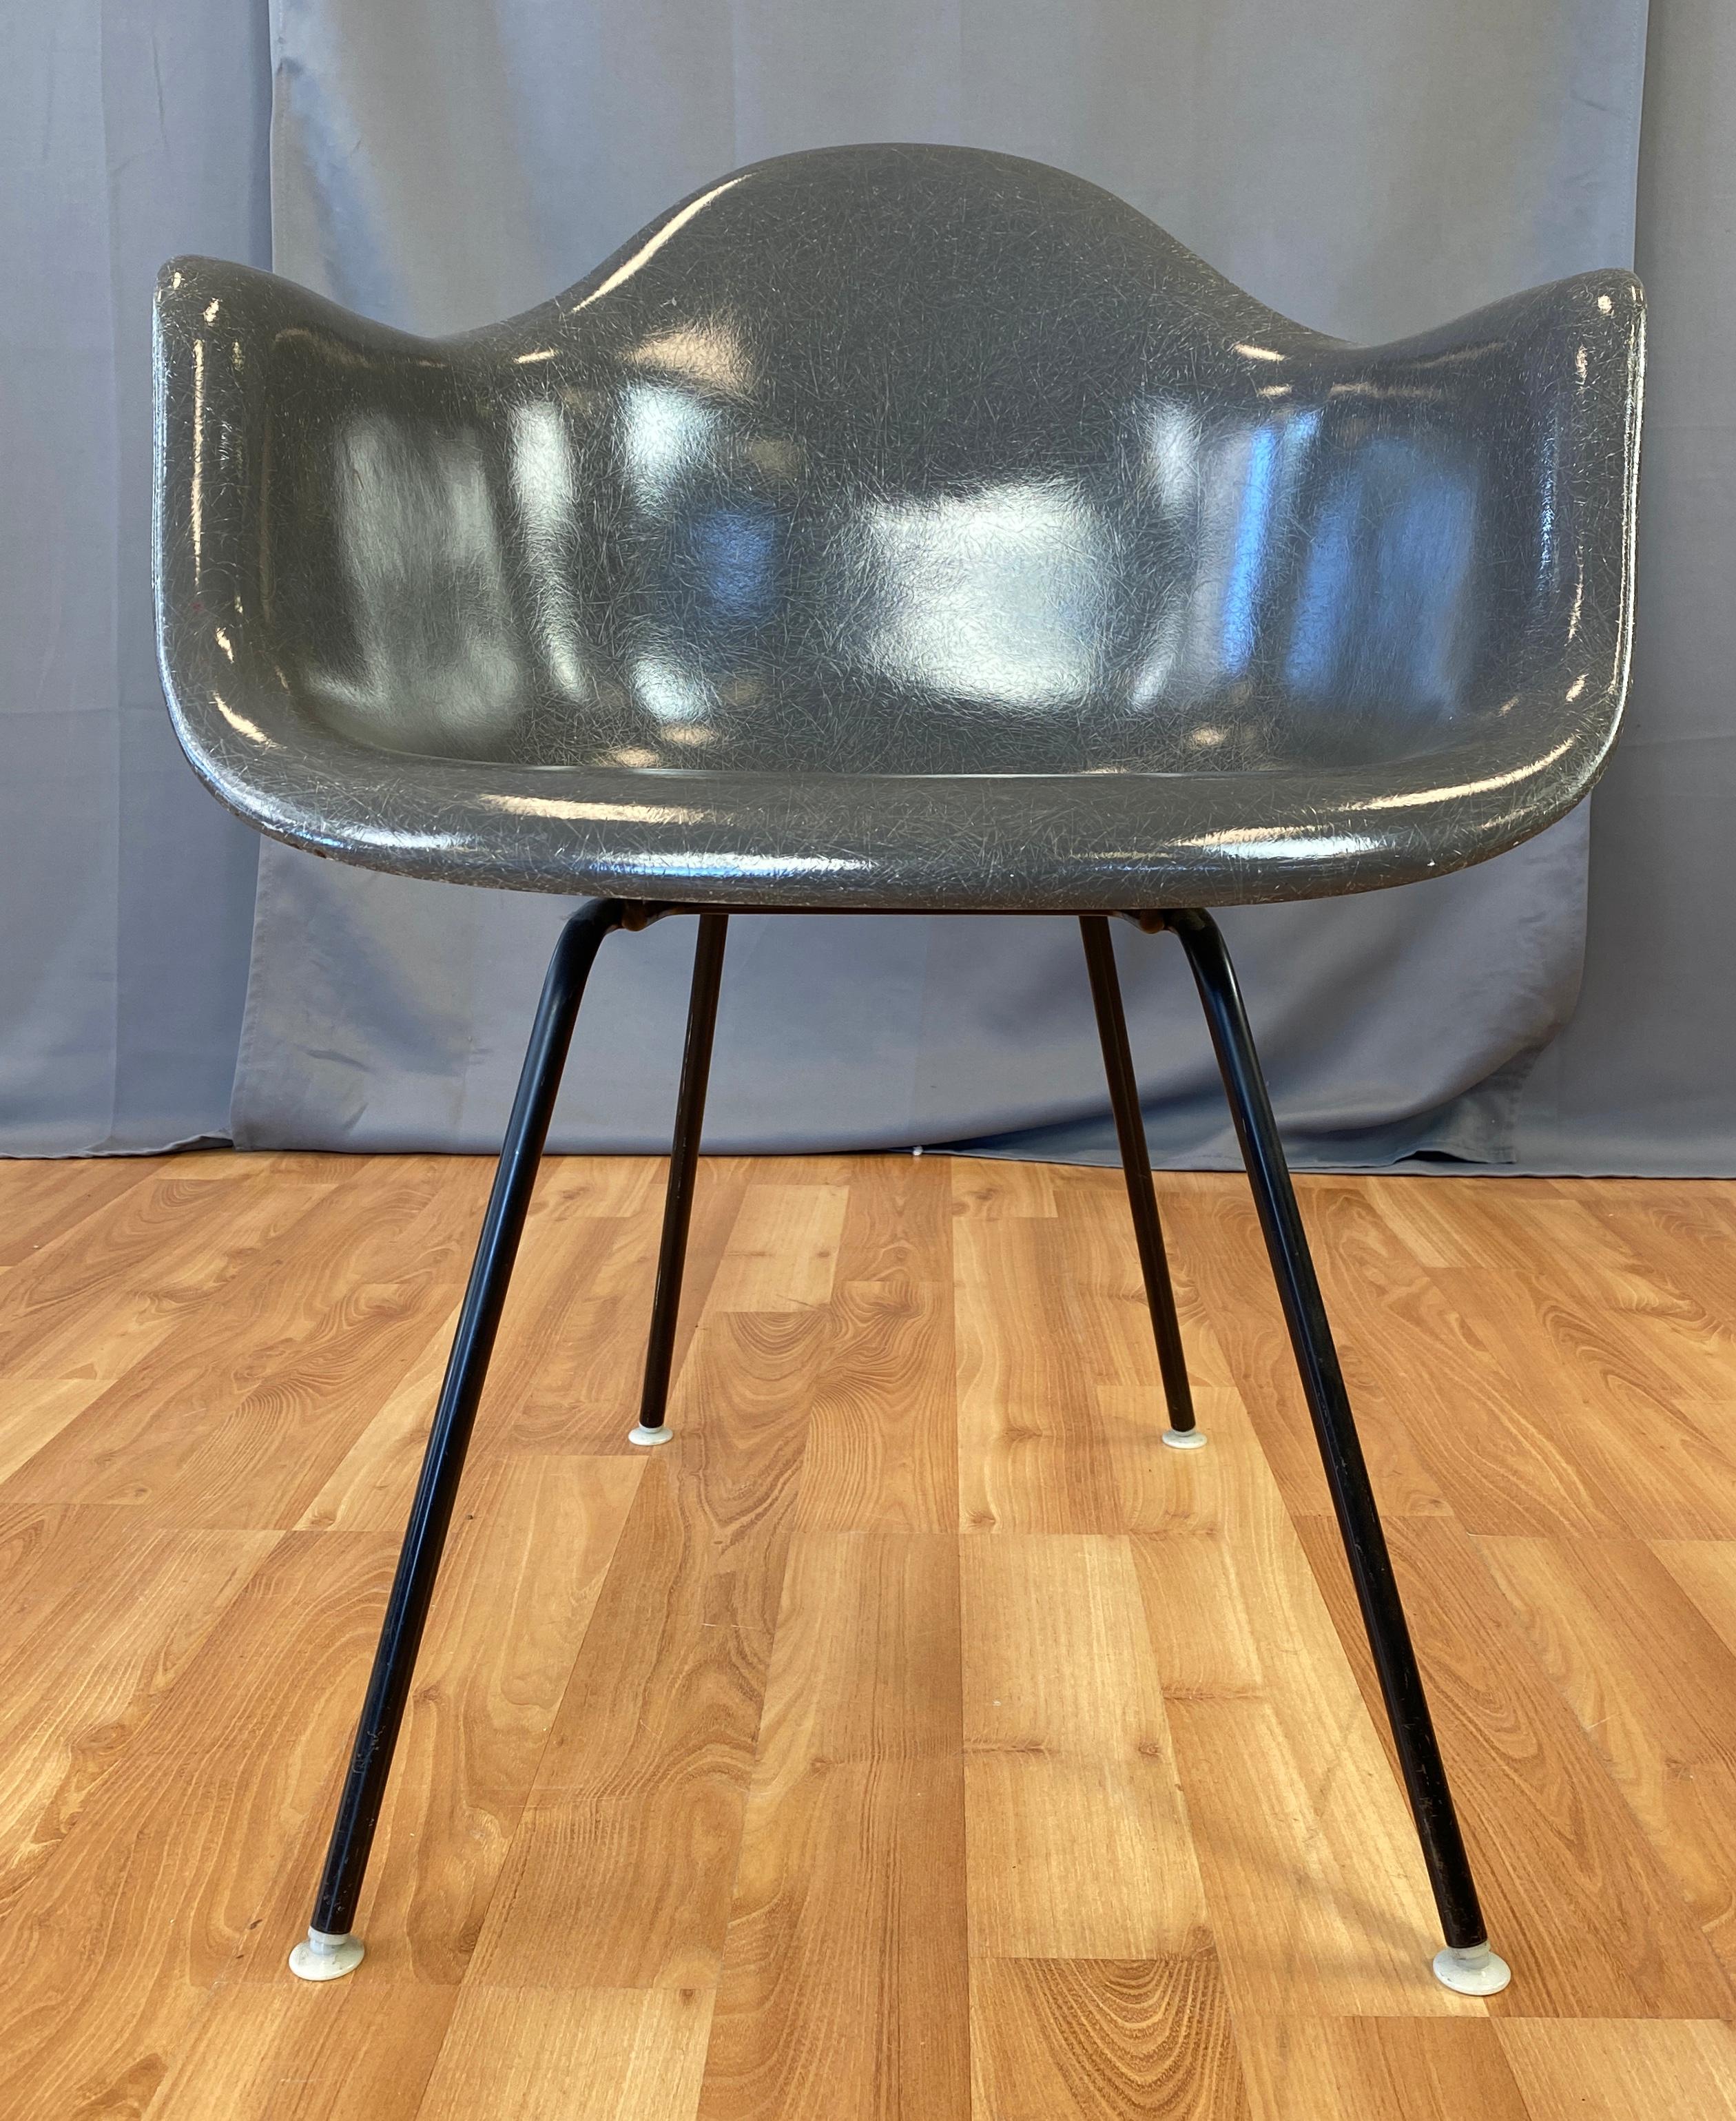 A Charles Eames designed fiberglass shell armchair for Herman Miller, this one has the rare flame logo.
Made between 1959 and 1960.